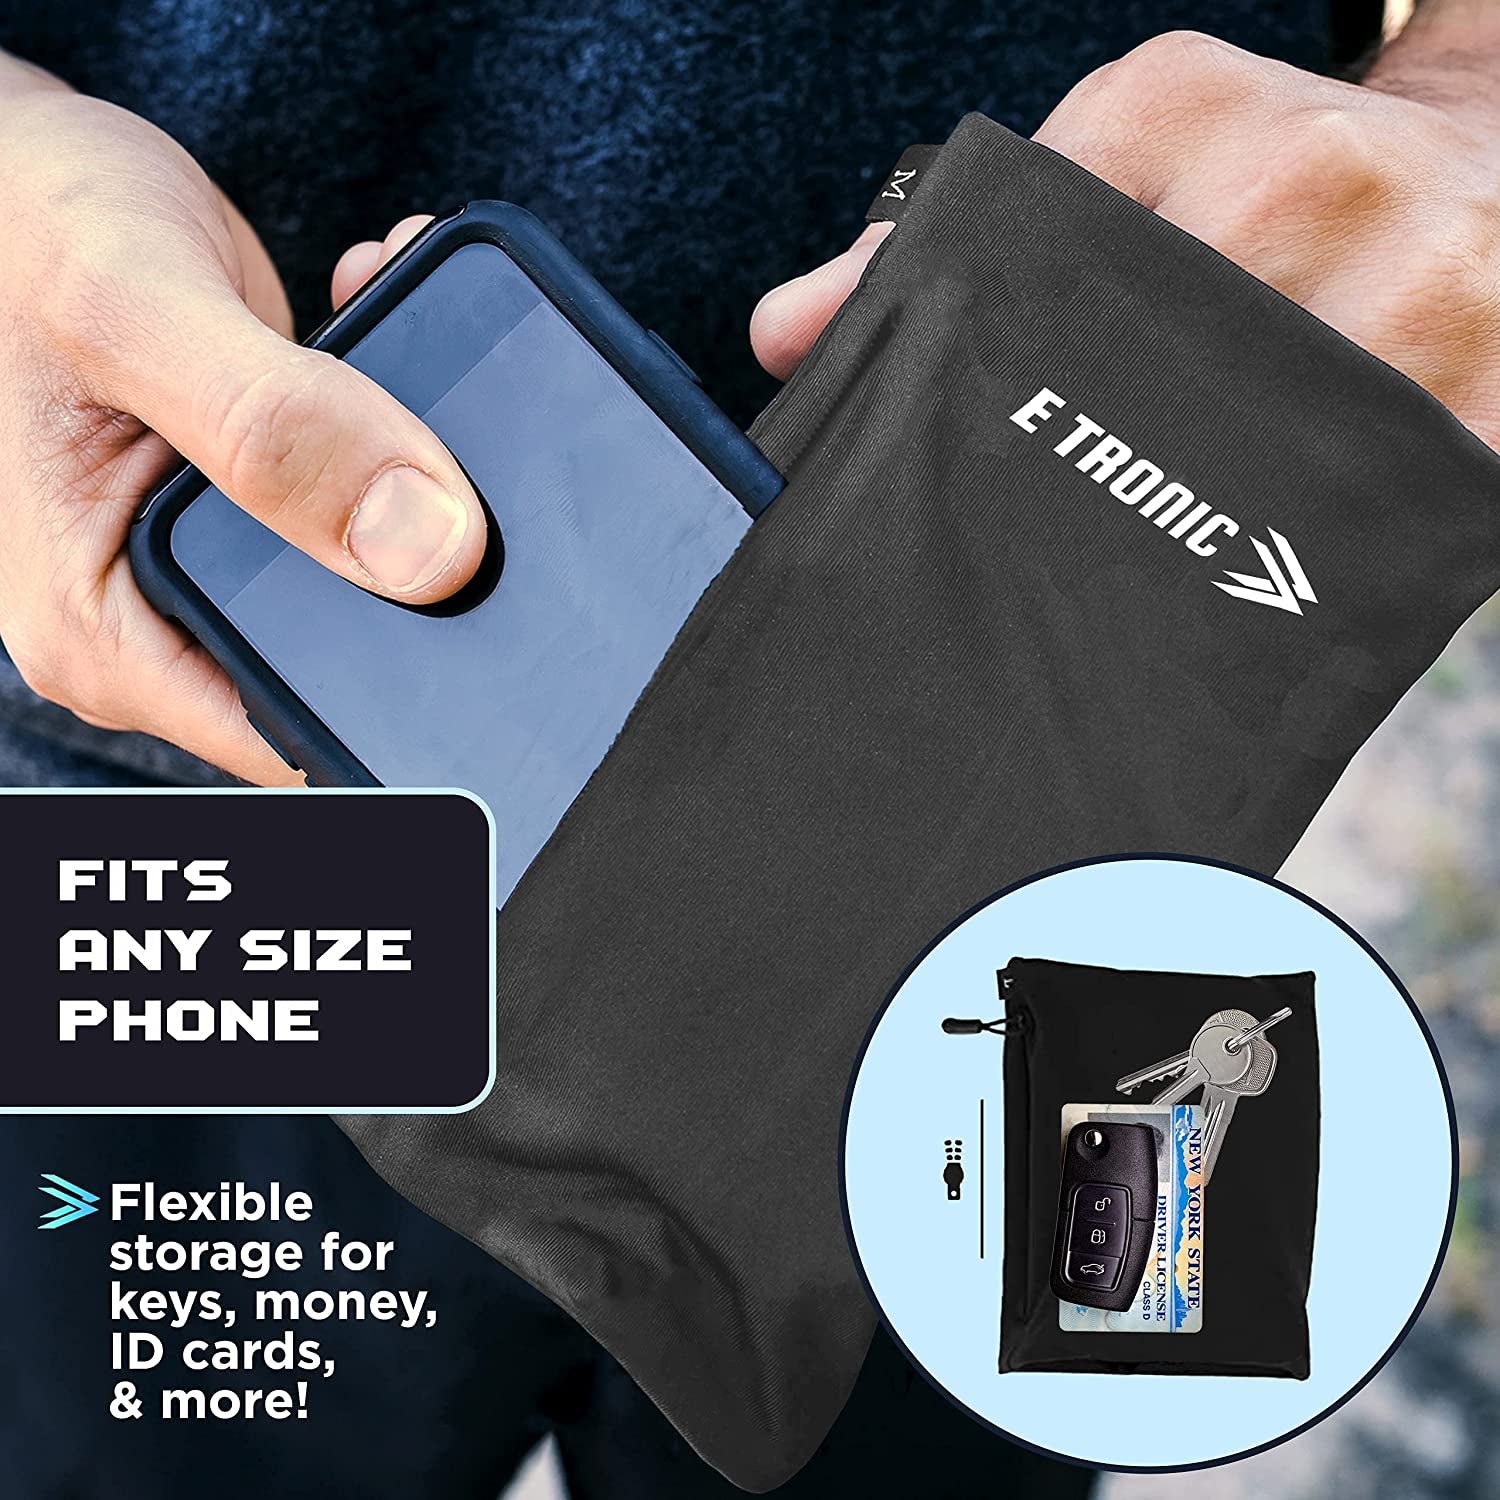 Phone Holder for Running, Cell Phone Arm Bands with Reflective Logo, Phone Strap Armband Fits iPhone and Android, Use for Running, Walking, Hiking and Biking, Black, Medium